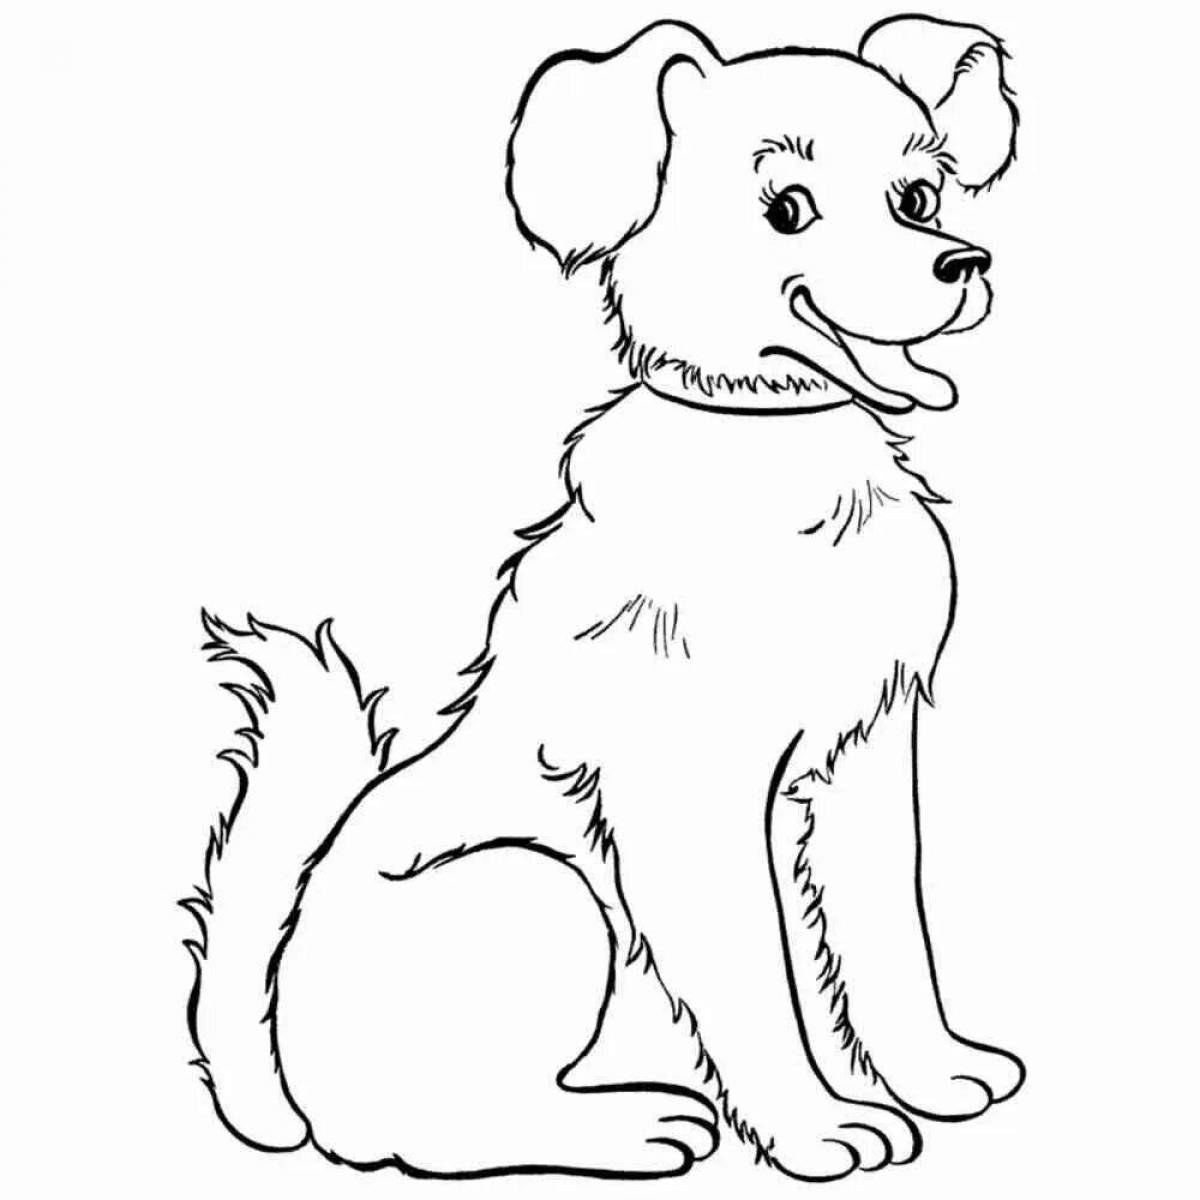 Shiny dog ​​coloring book for kids